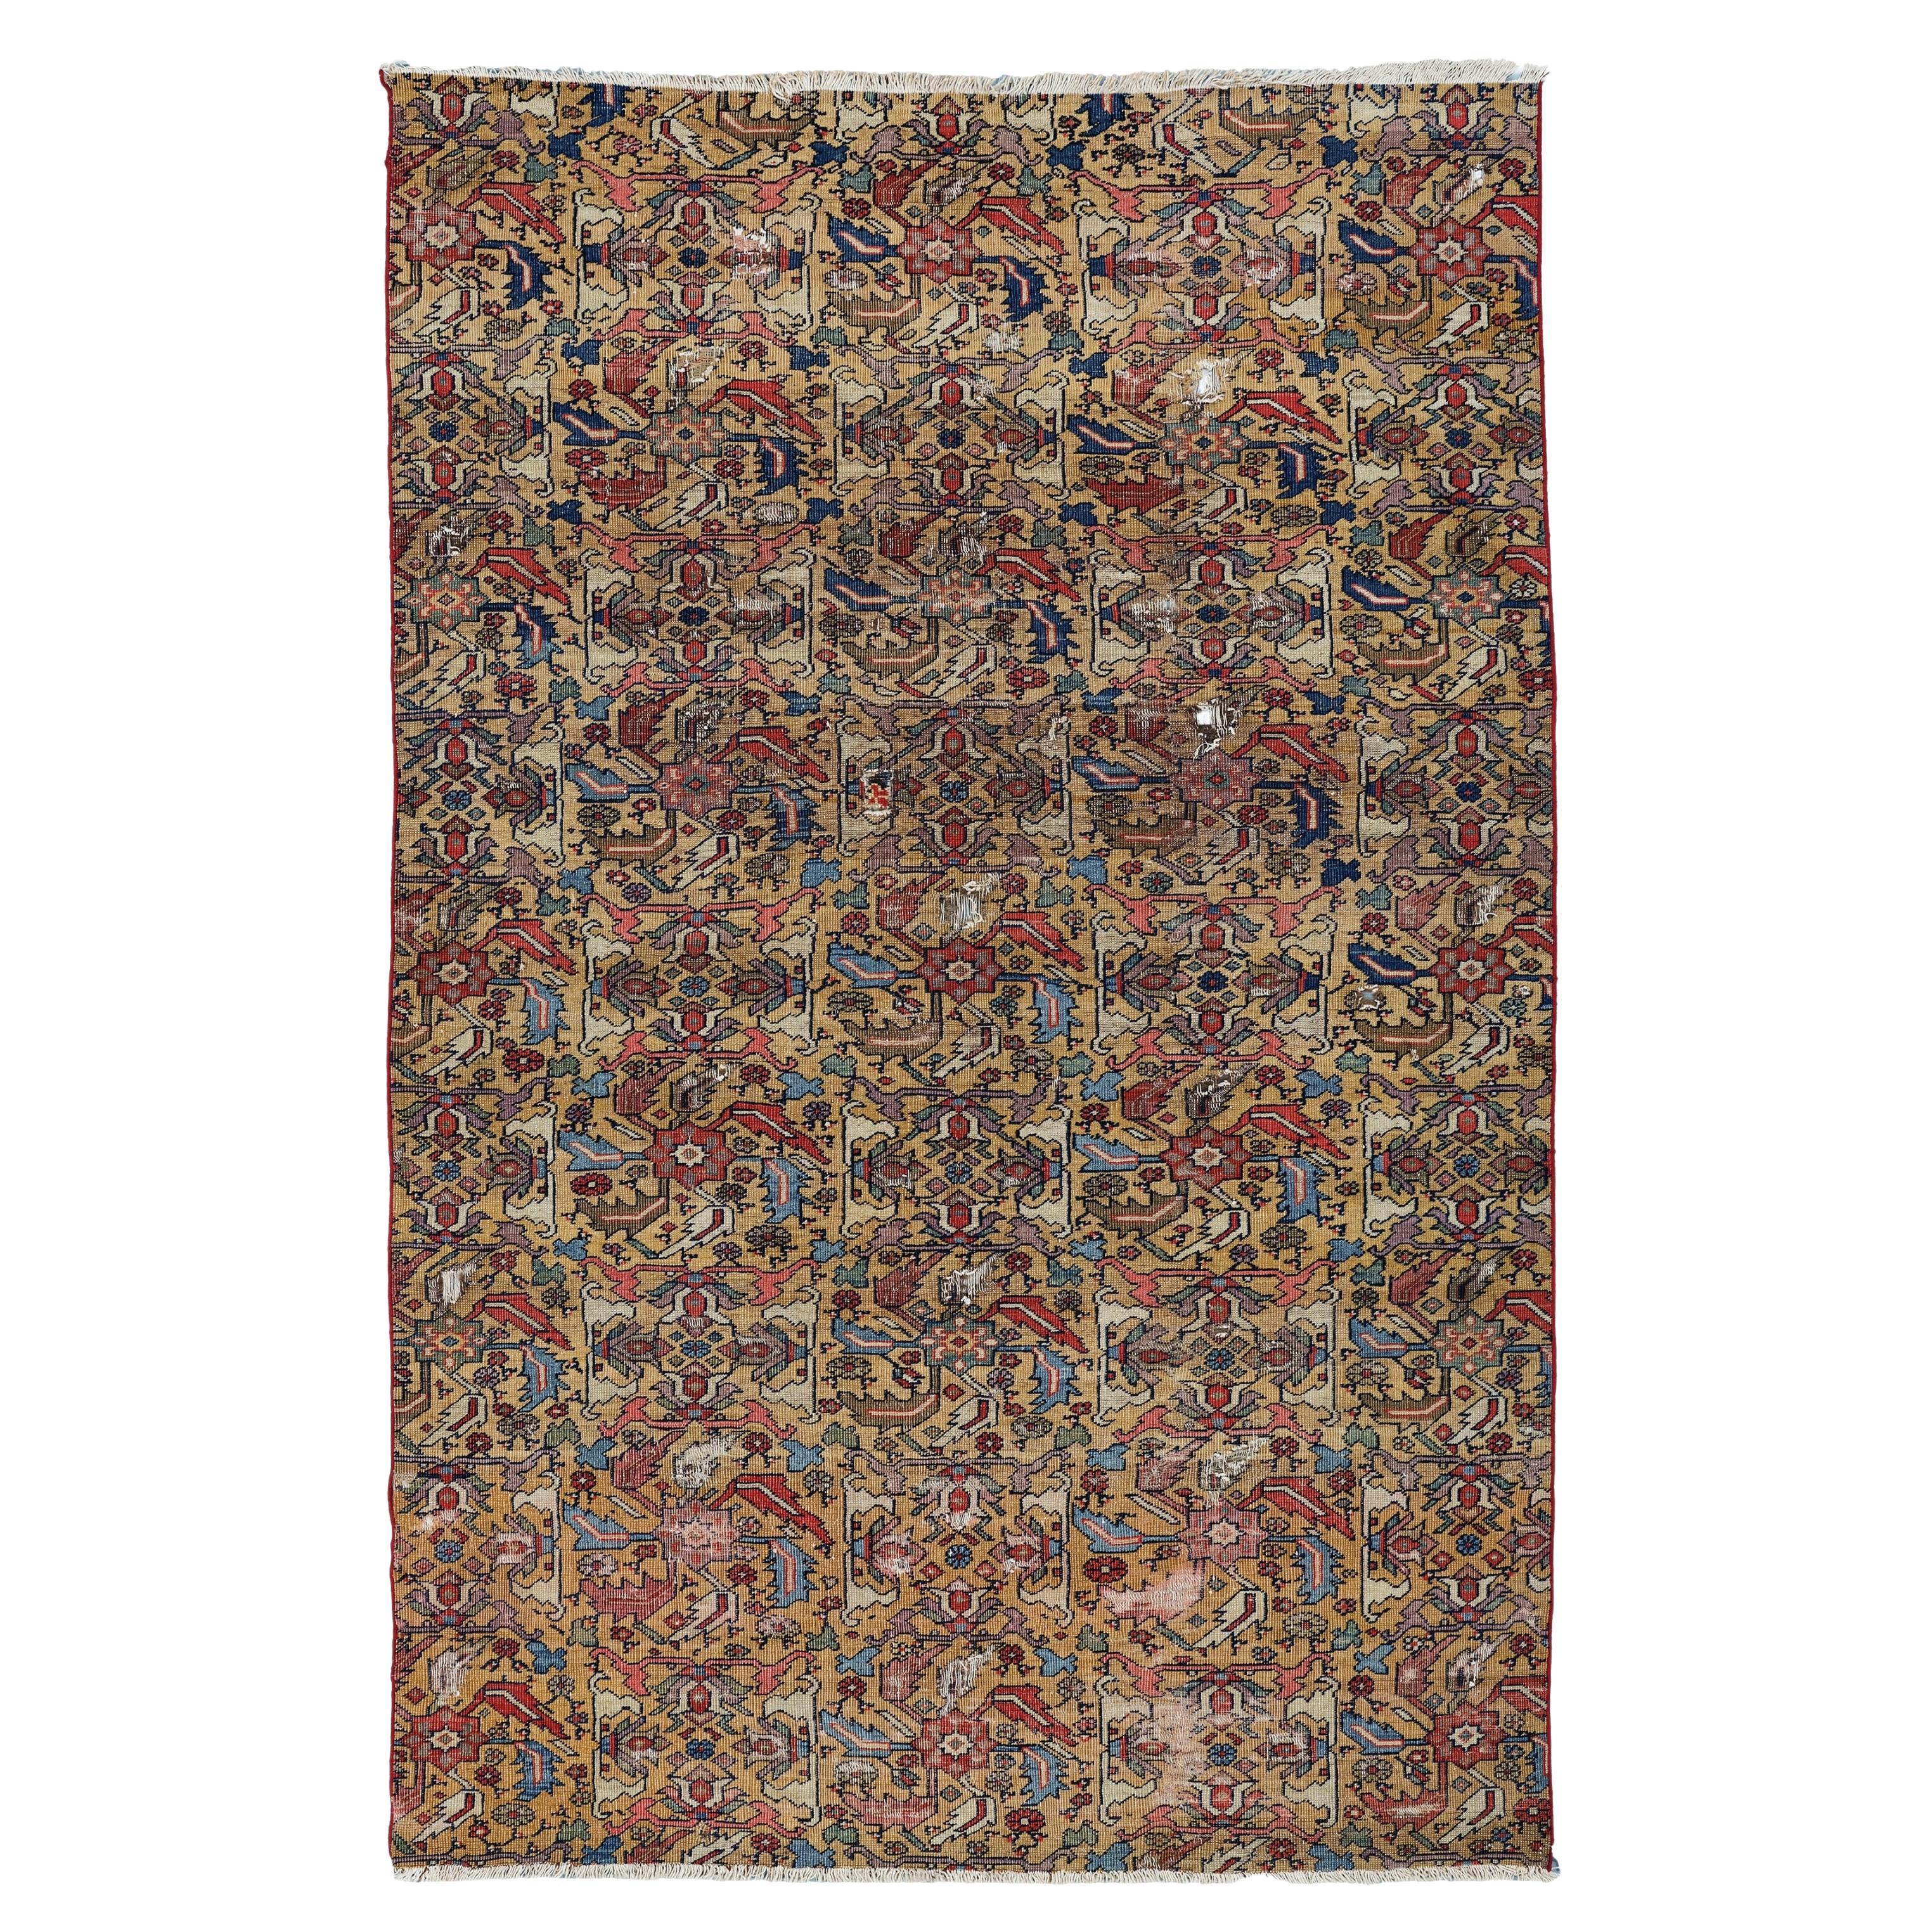 Antique Persian Fragment - 19th Century Fragment Rug, Handwoven Rug, Antique Rug For Sale